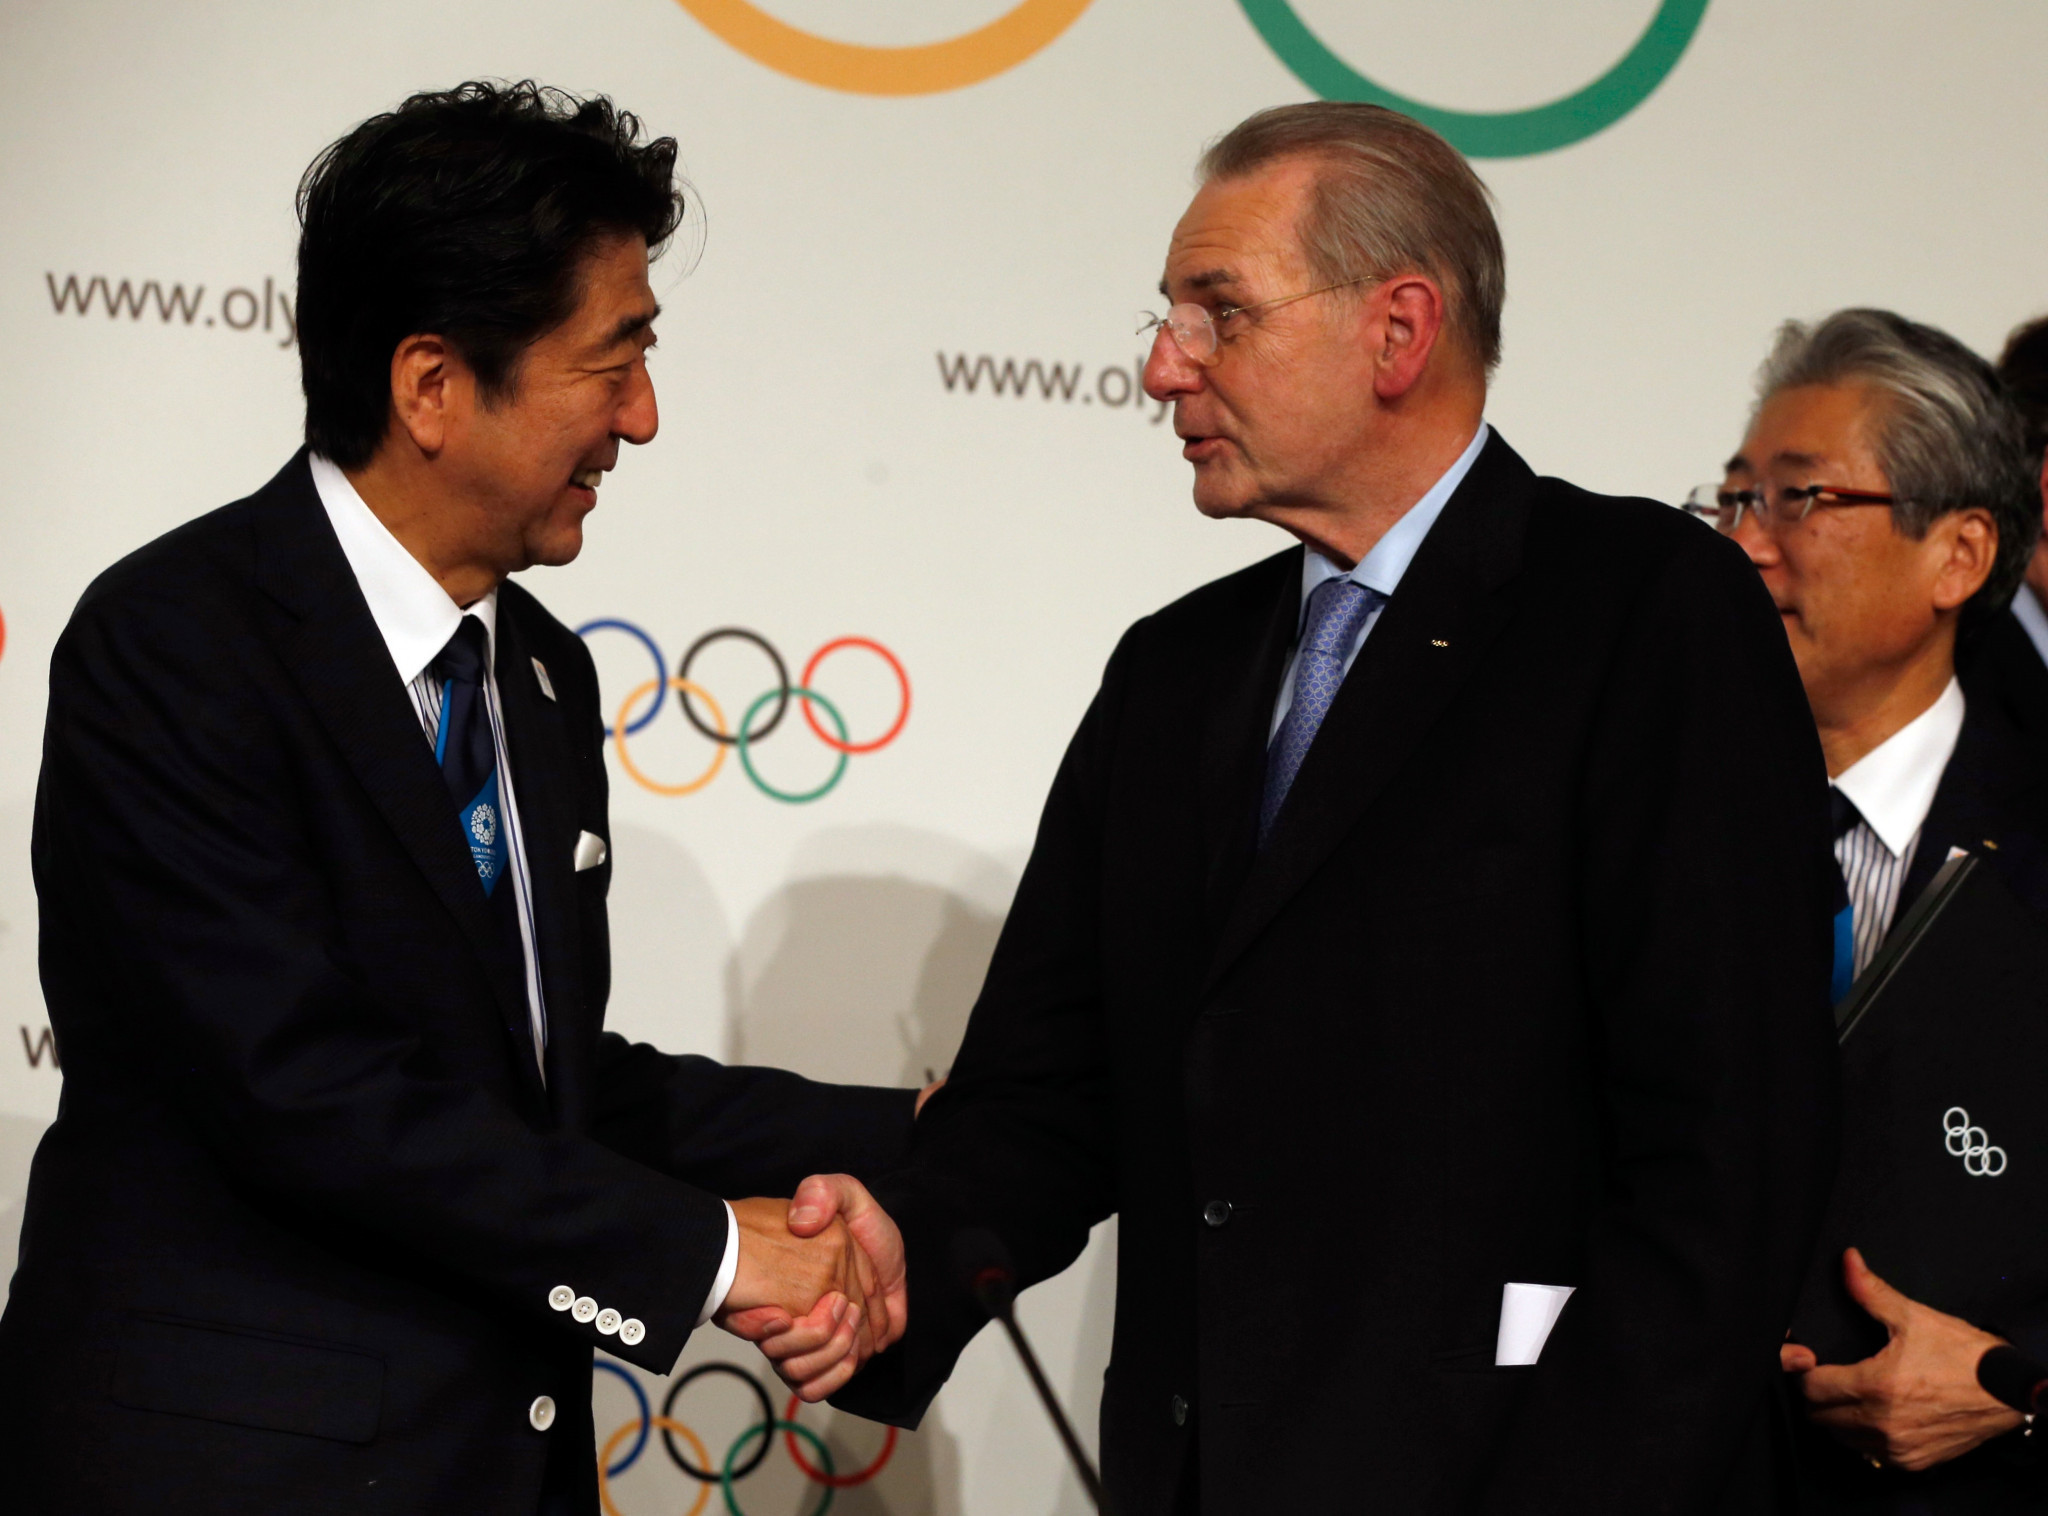 The late IOC President Rogge and former Japanese Prime Minister Shinzo Abe sign the host city contract in 2013 ©Getty Images